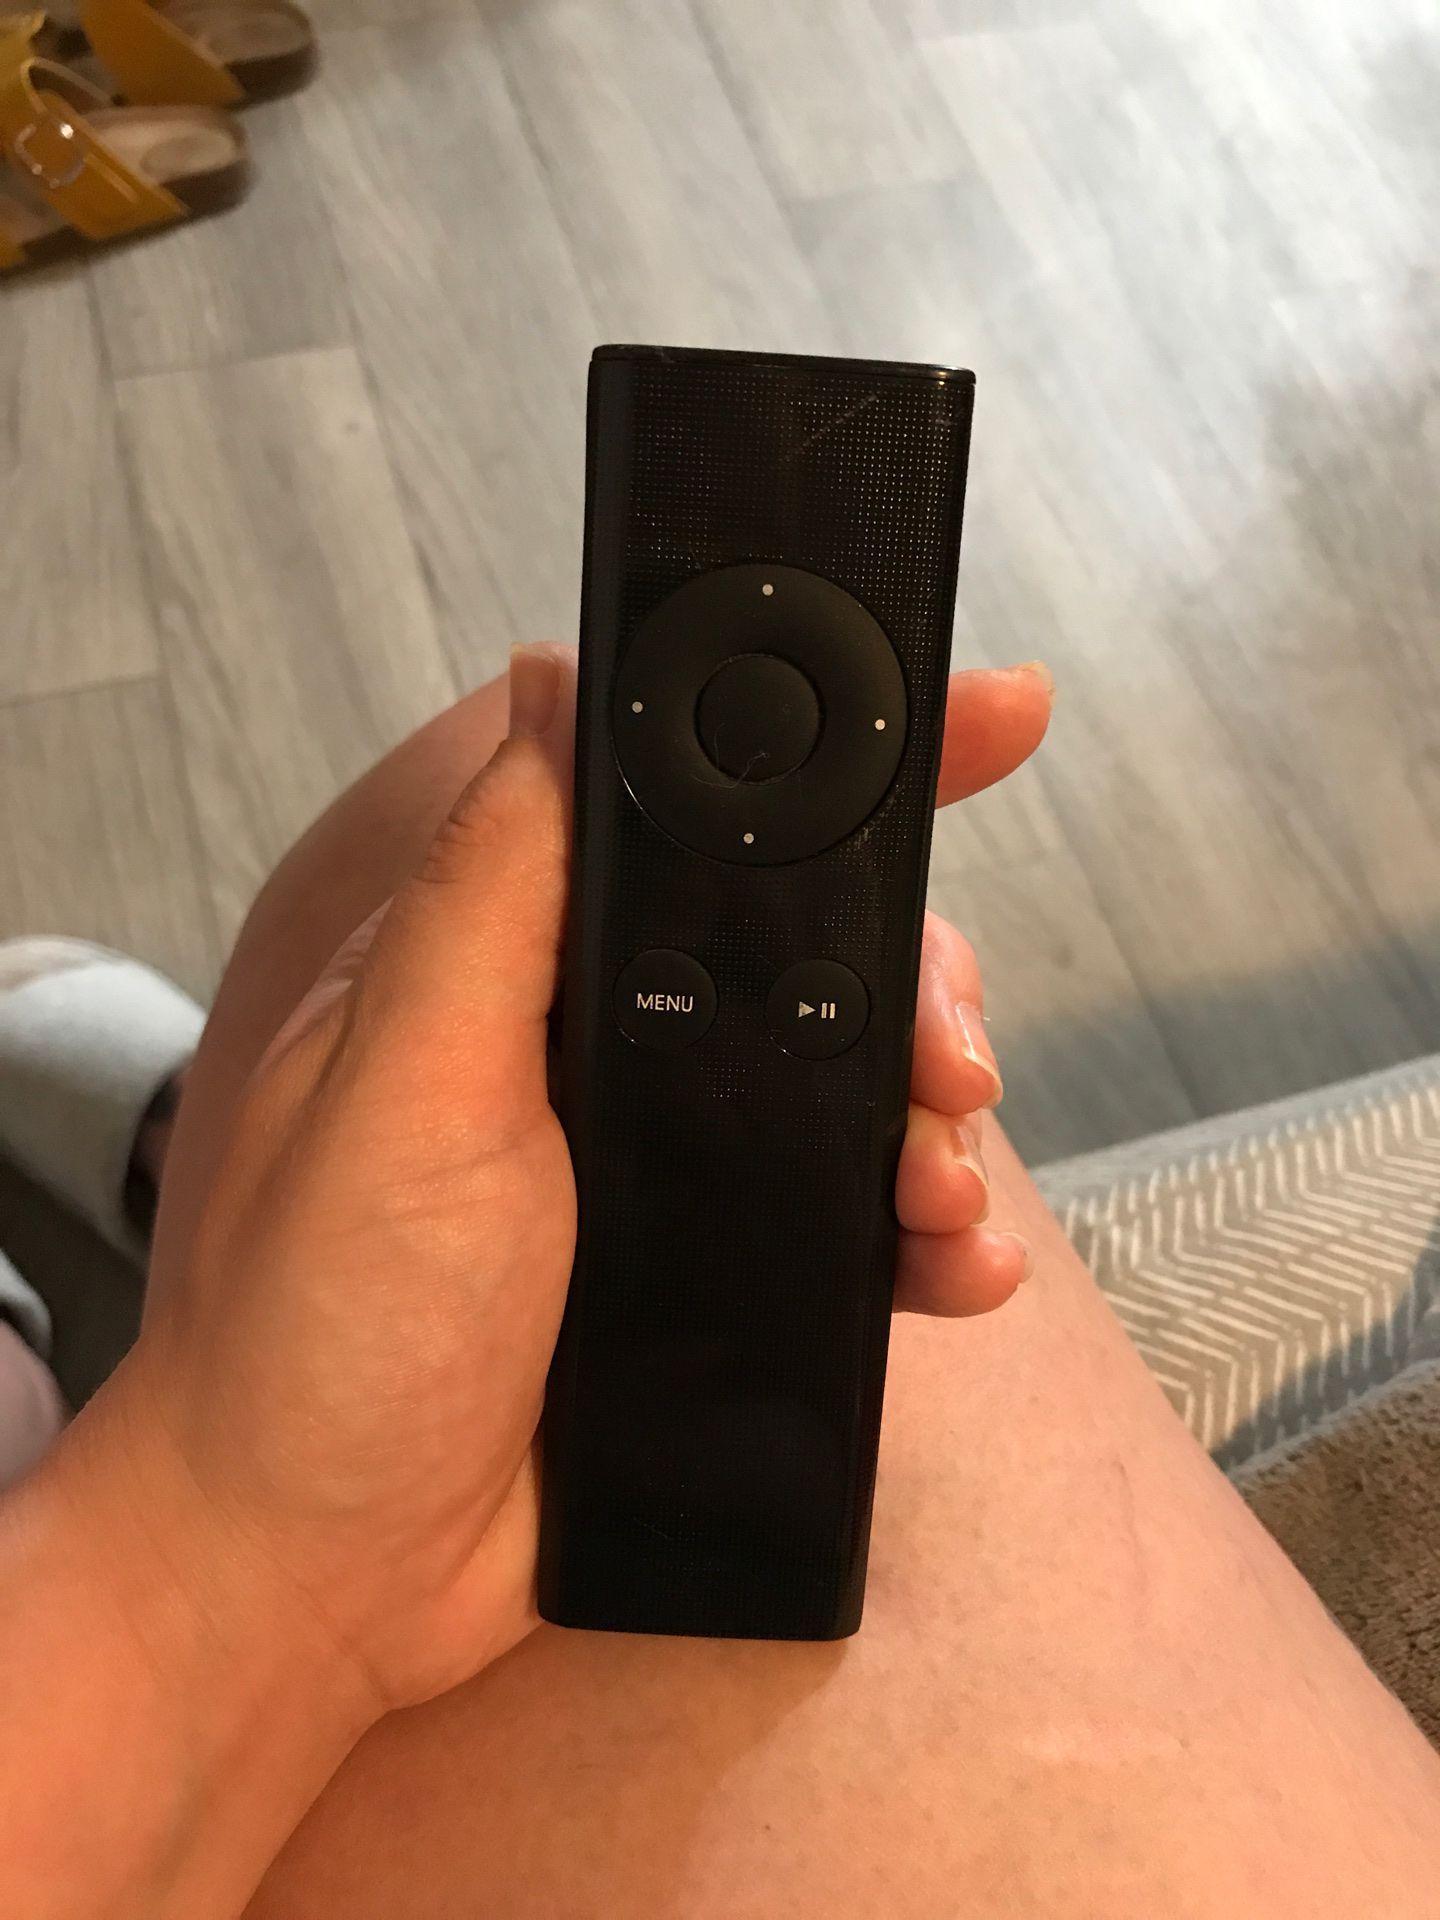 Apple TV remote works perfect!